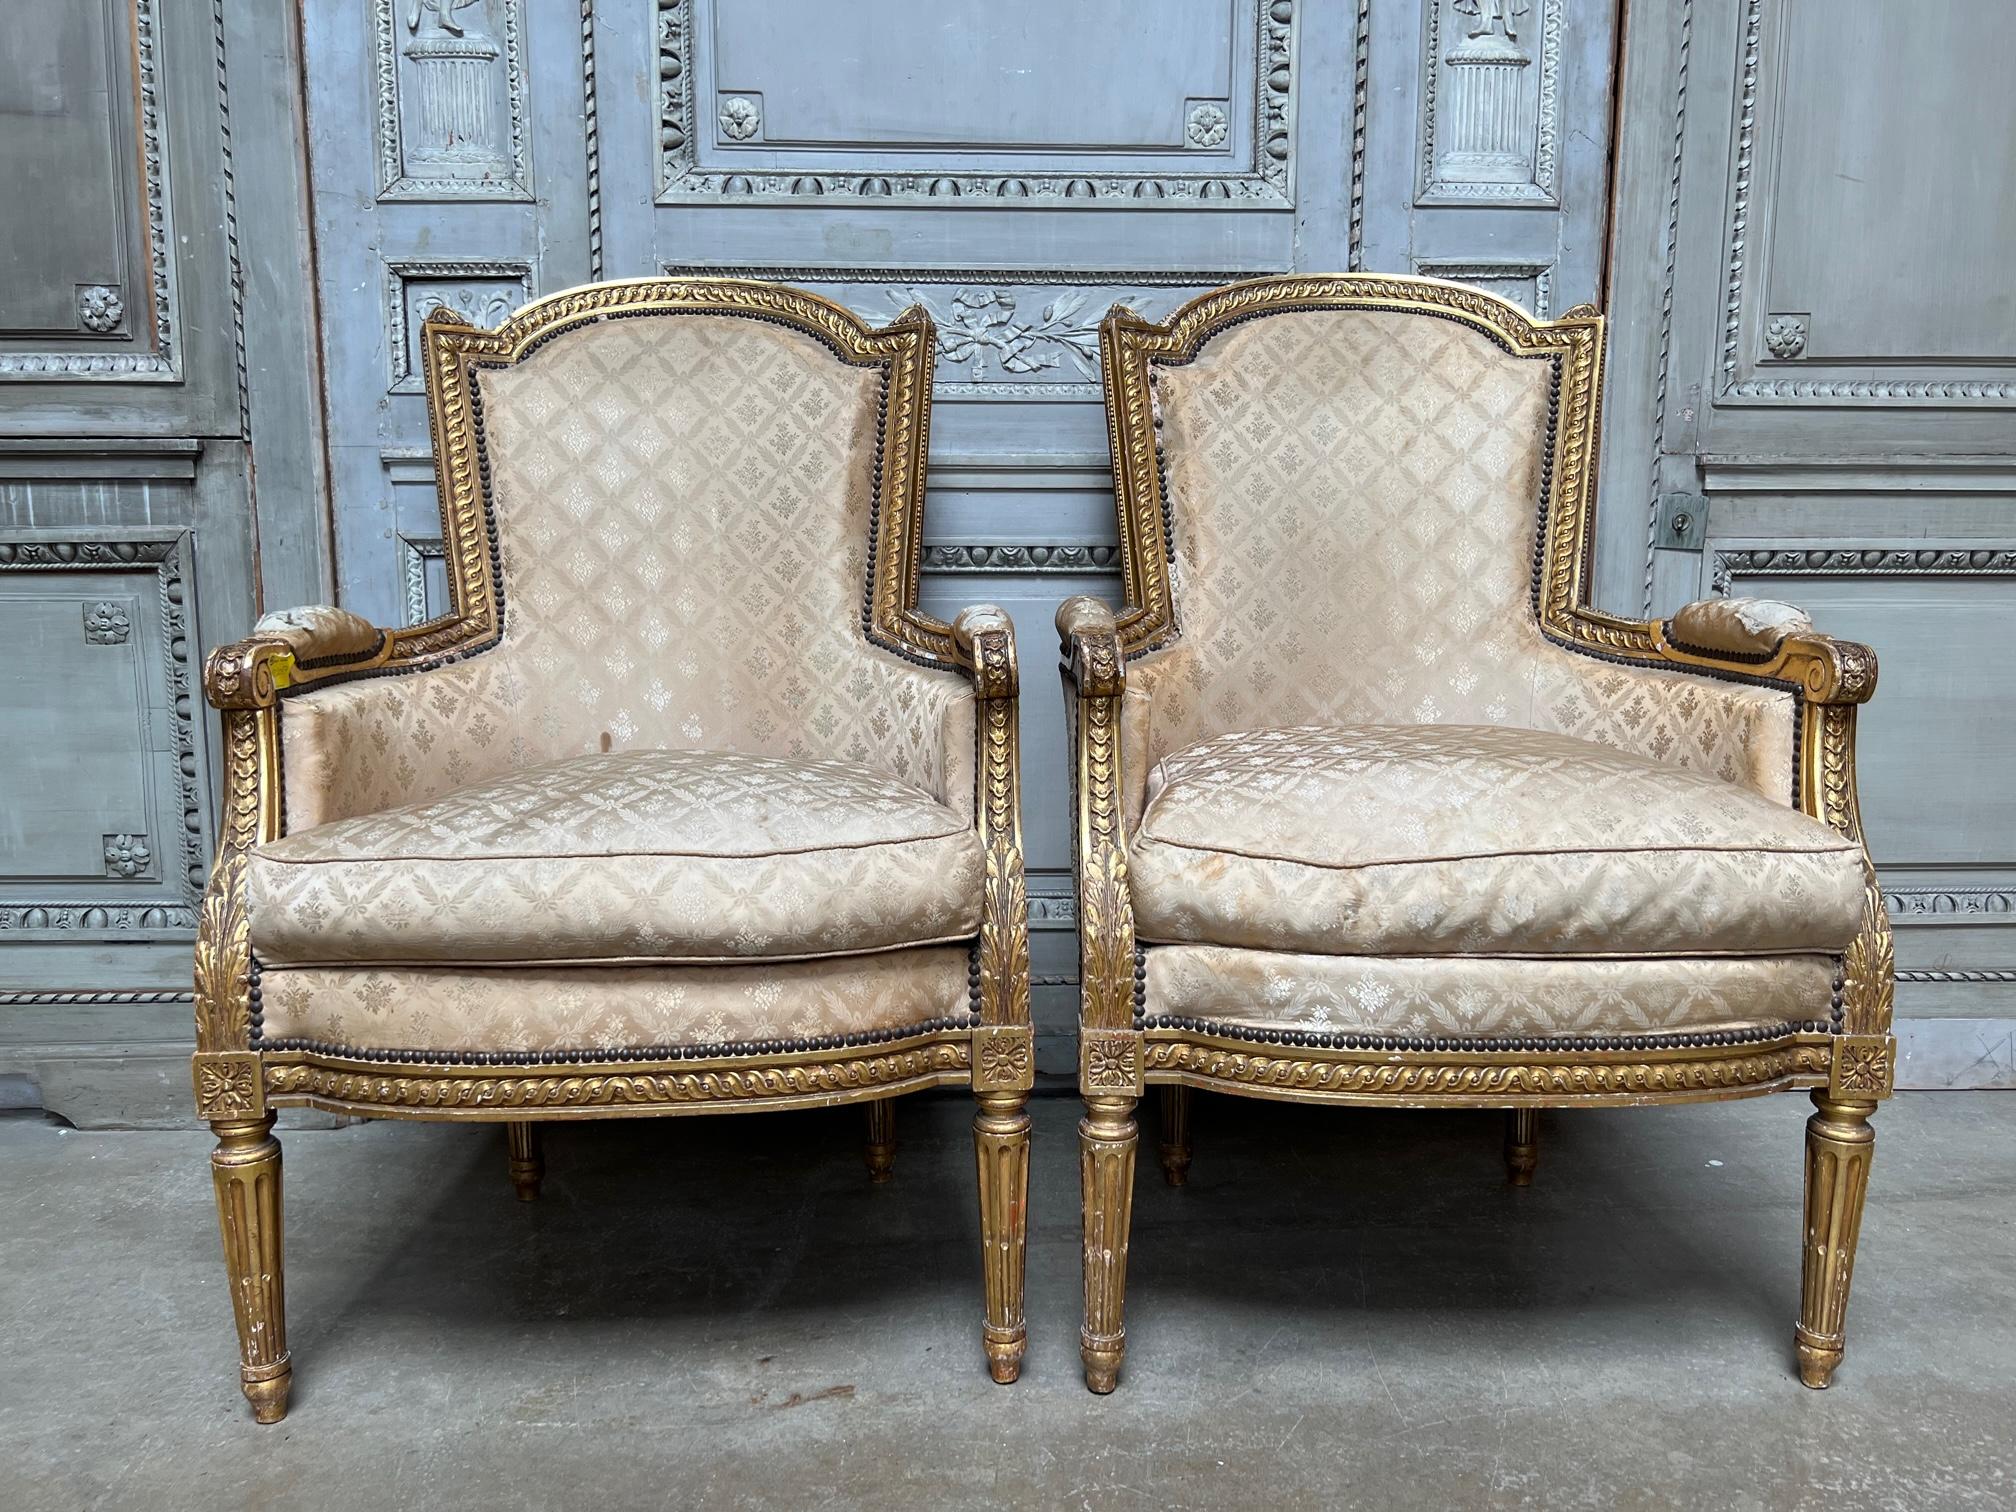 A very large pair of giltwood bergeres with a hod shaped back and deeply carved gadrooning beading and fluted legs. These great chairs date from the late 19th up until the 1920s, so we dated them 20s to be on the safe side. They are a very nice